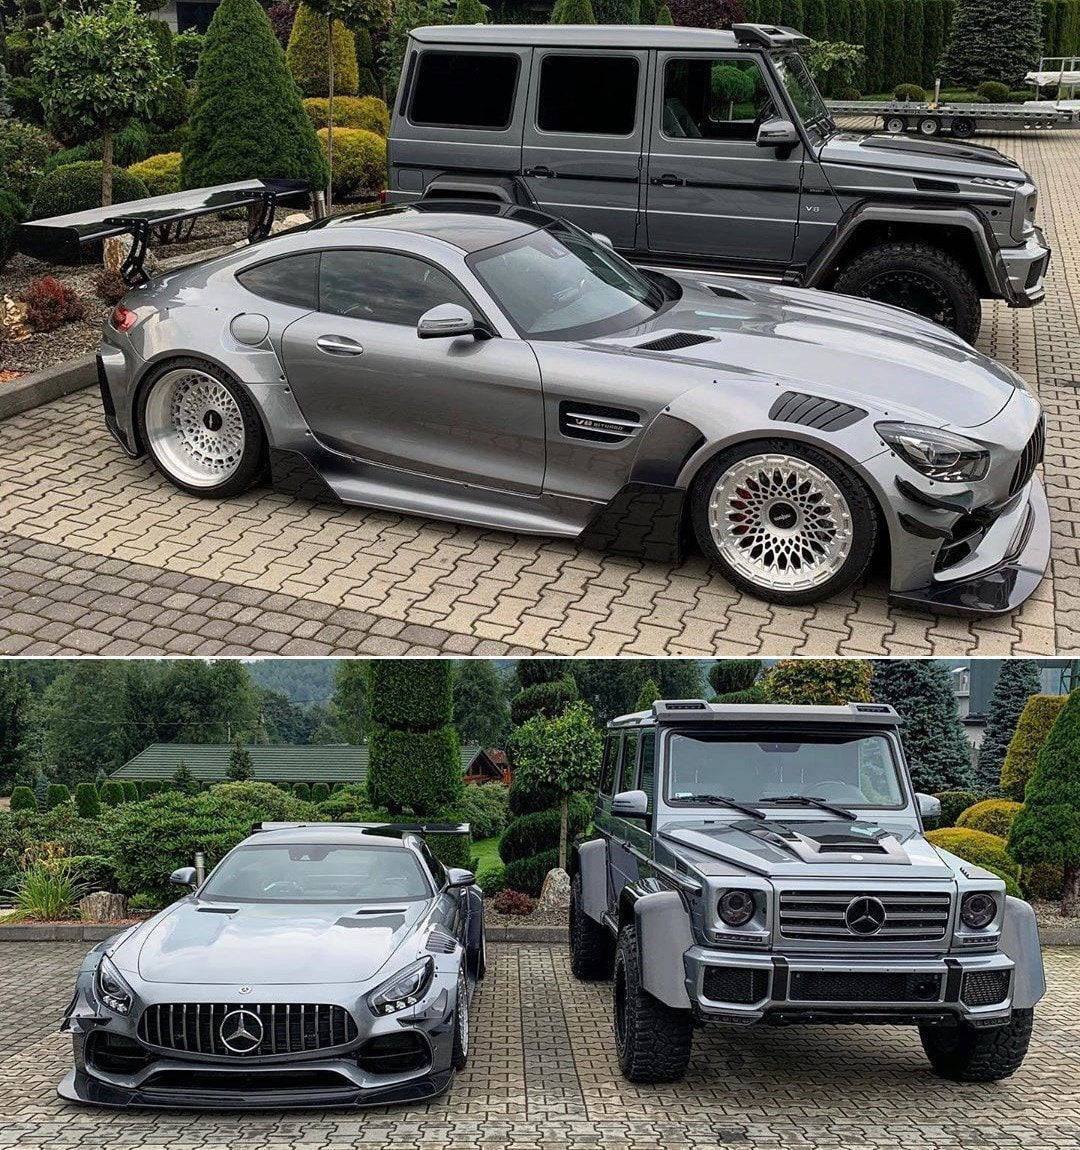 GTS or G550? - Chase your dream car, leave the worry to us. #SUV, #Auto, #nicecars